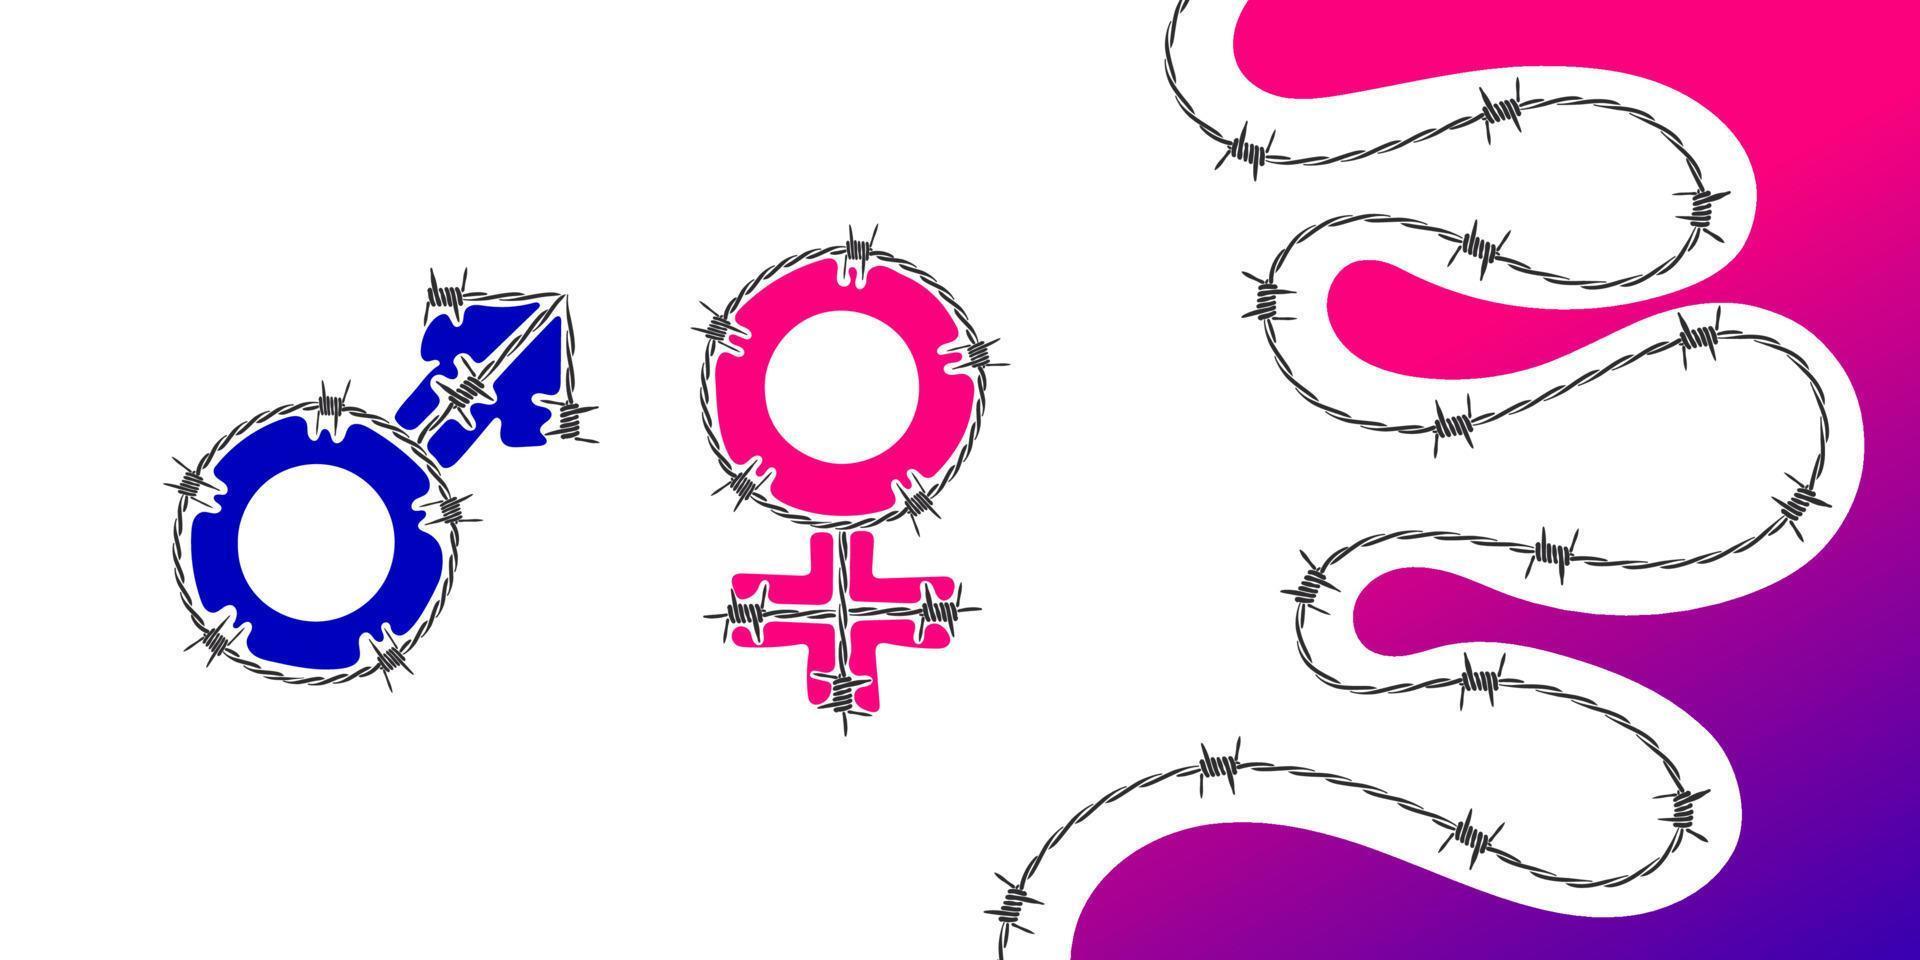 Gender symbols with barbed wire. Razor wire. Vector scalable graphics